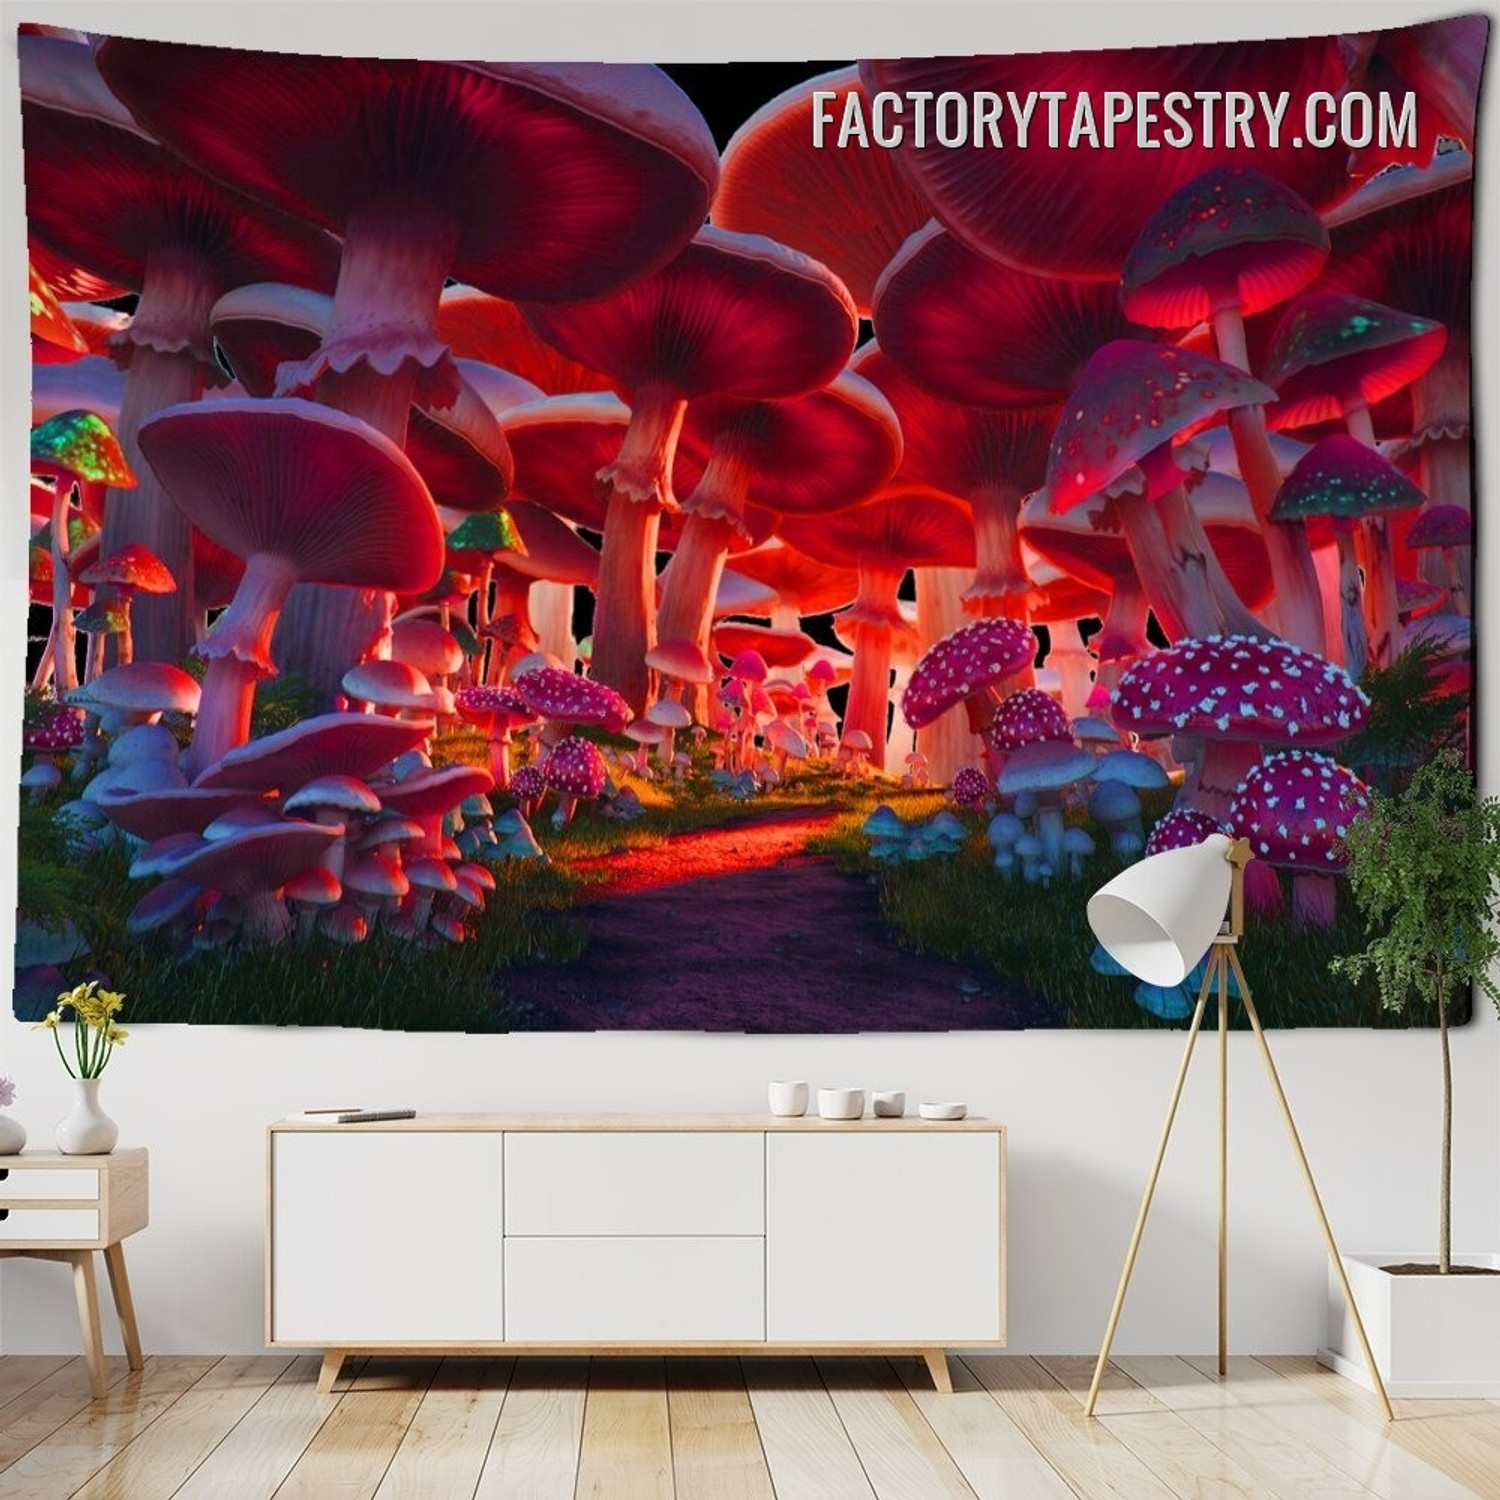 Psychedelic Mountain Mushroom Scenery Tapestry Wall Hanging Tapestry Home Decor 